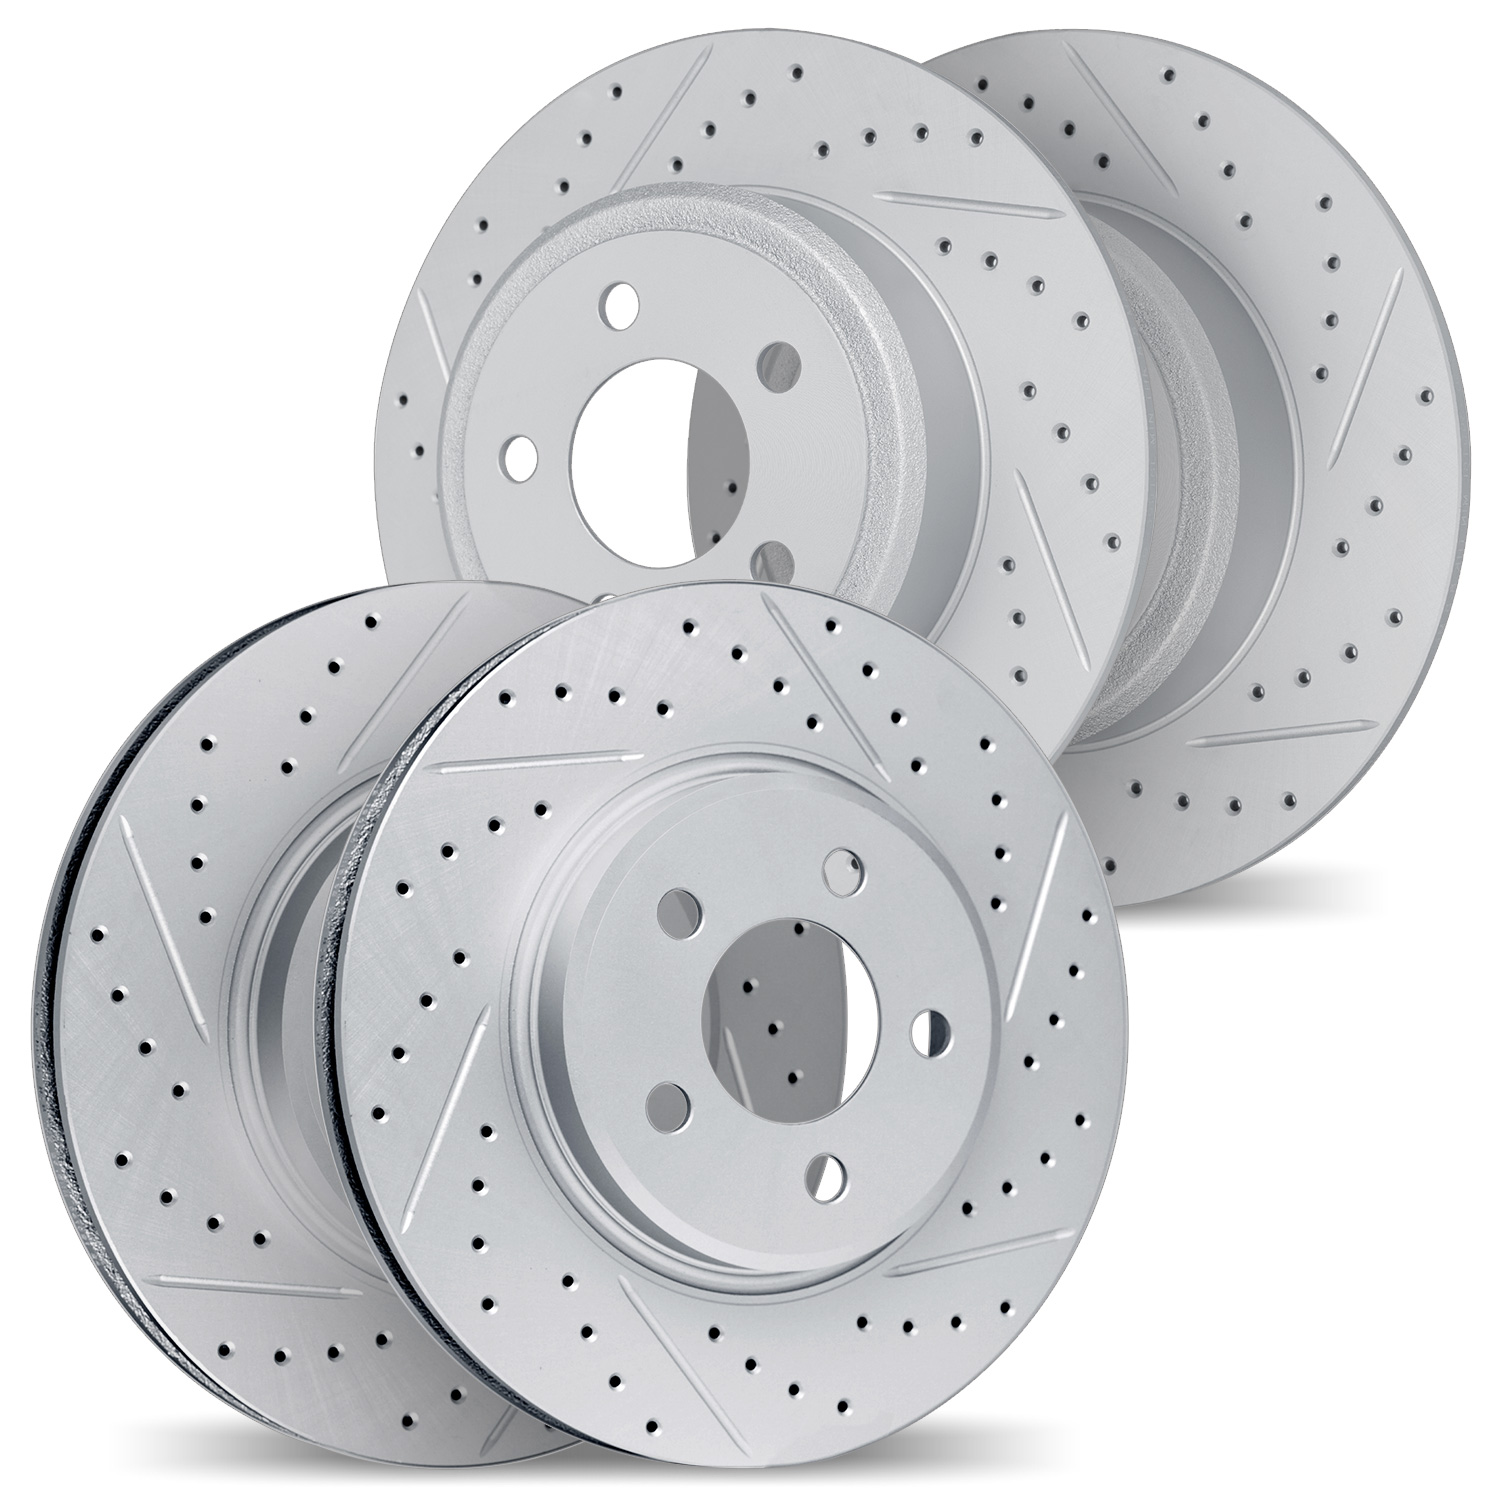 2004-03066 Geoperformance Drilled/Slotted Brake Rotors, 2012-2013 Kia/Hyundai/Genesis, Position: Front and Rear